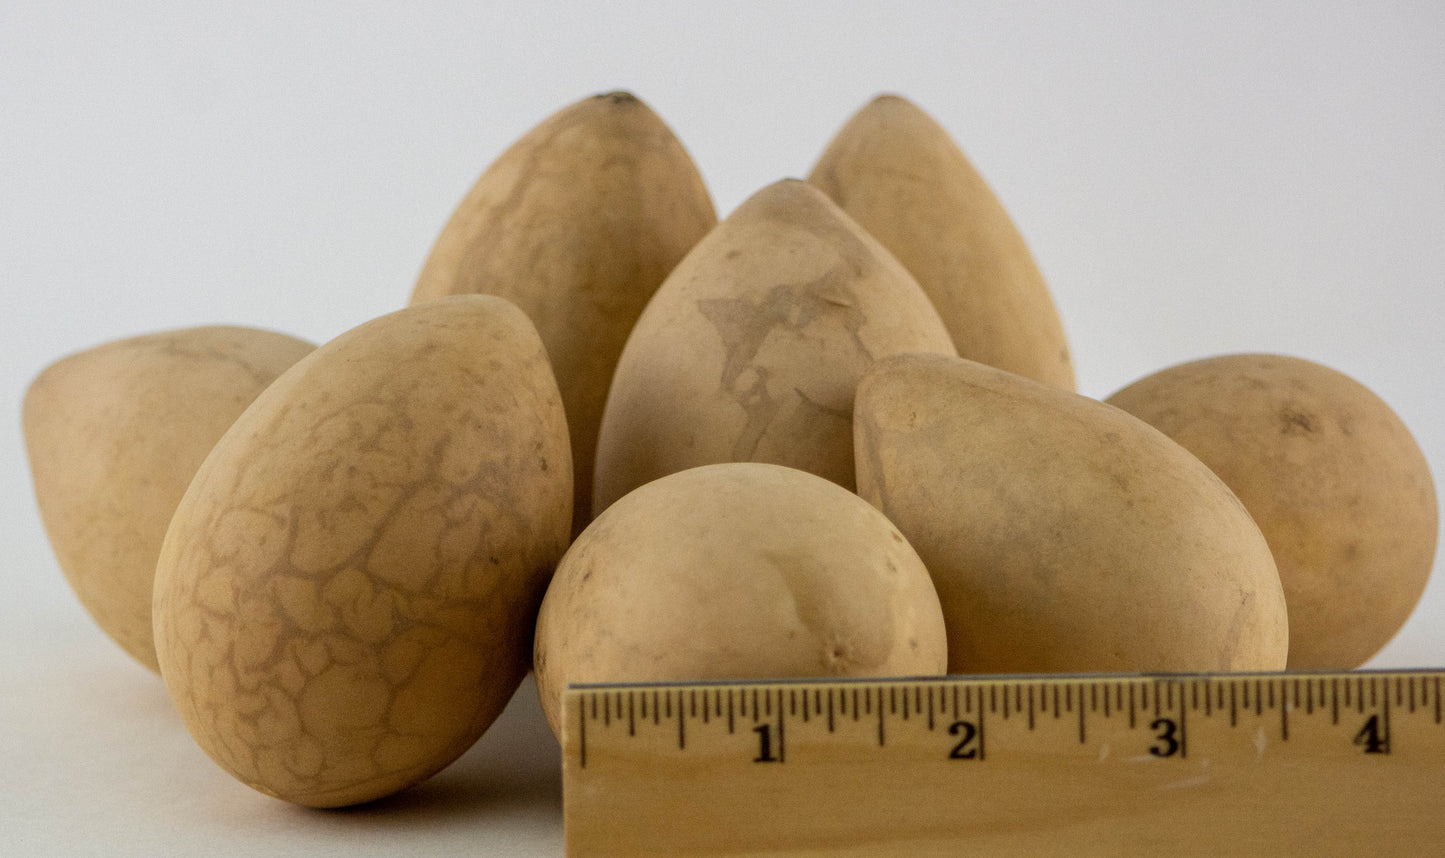 Dried Egg Gourds for Crafting -Box of 50 - Gourdaments